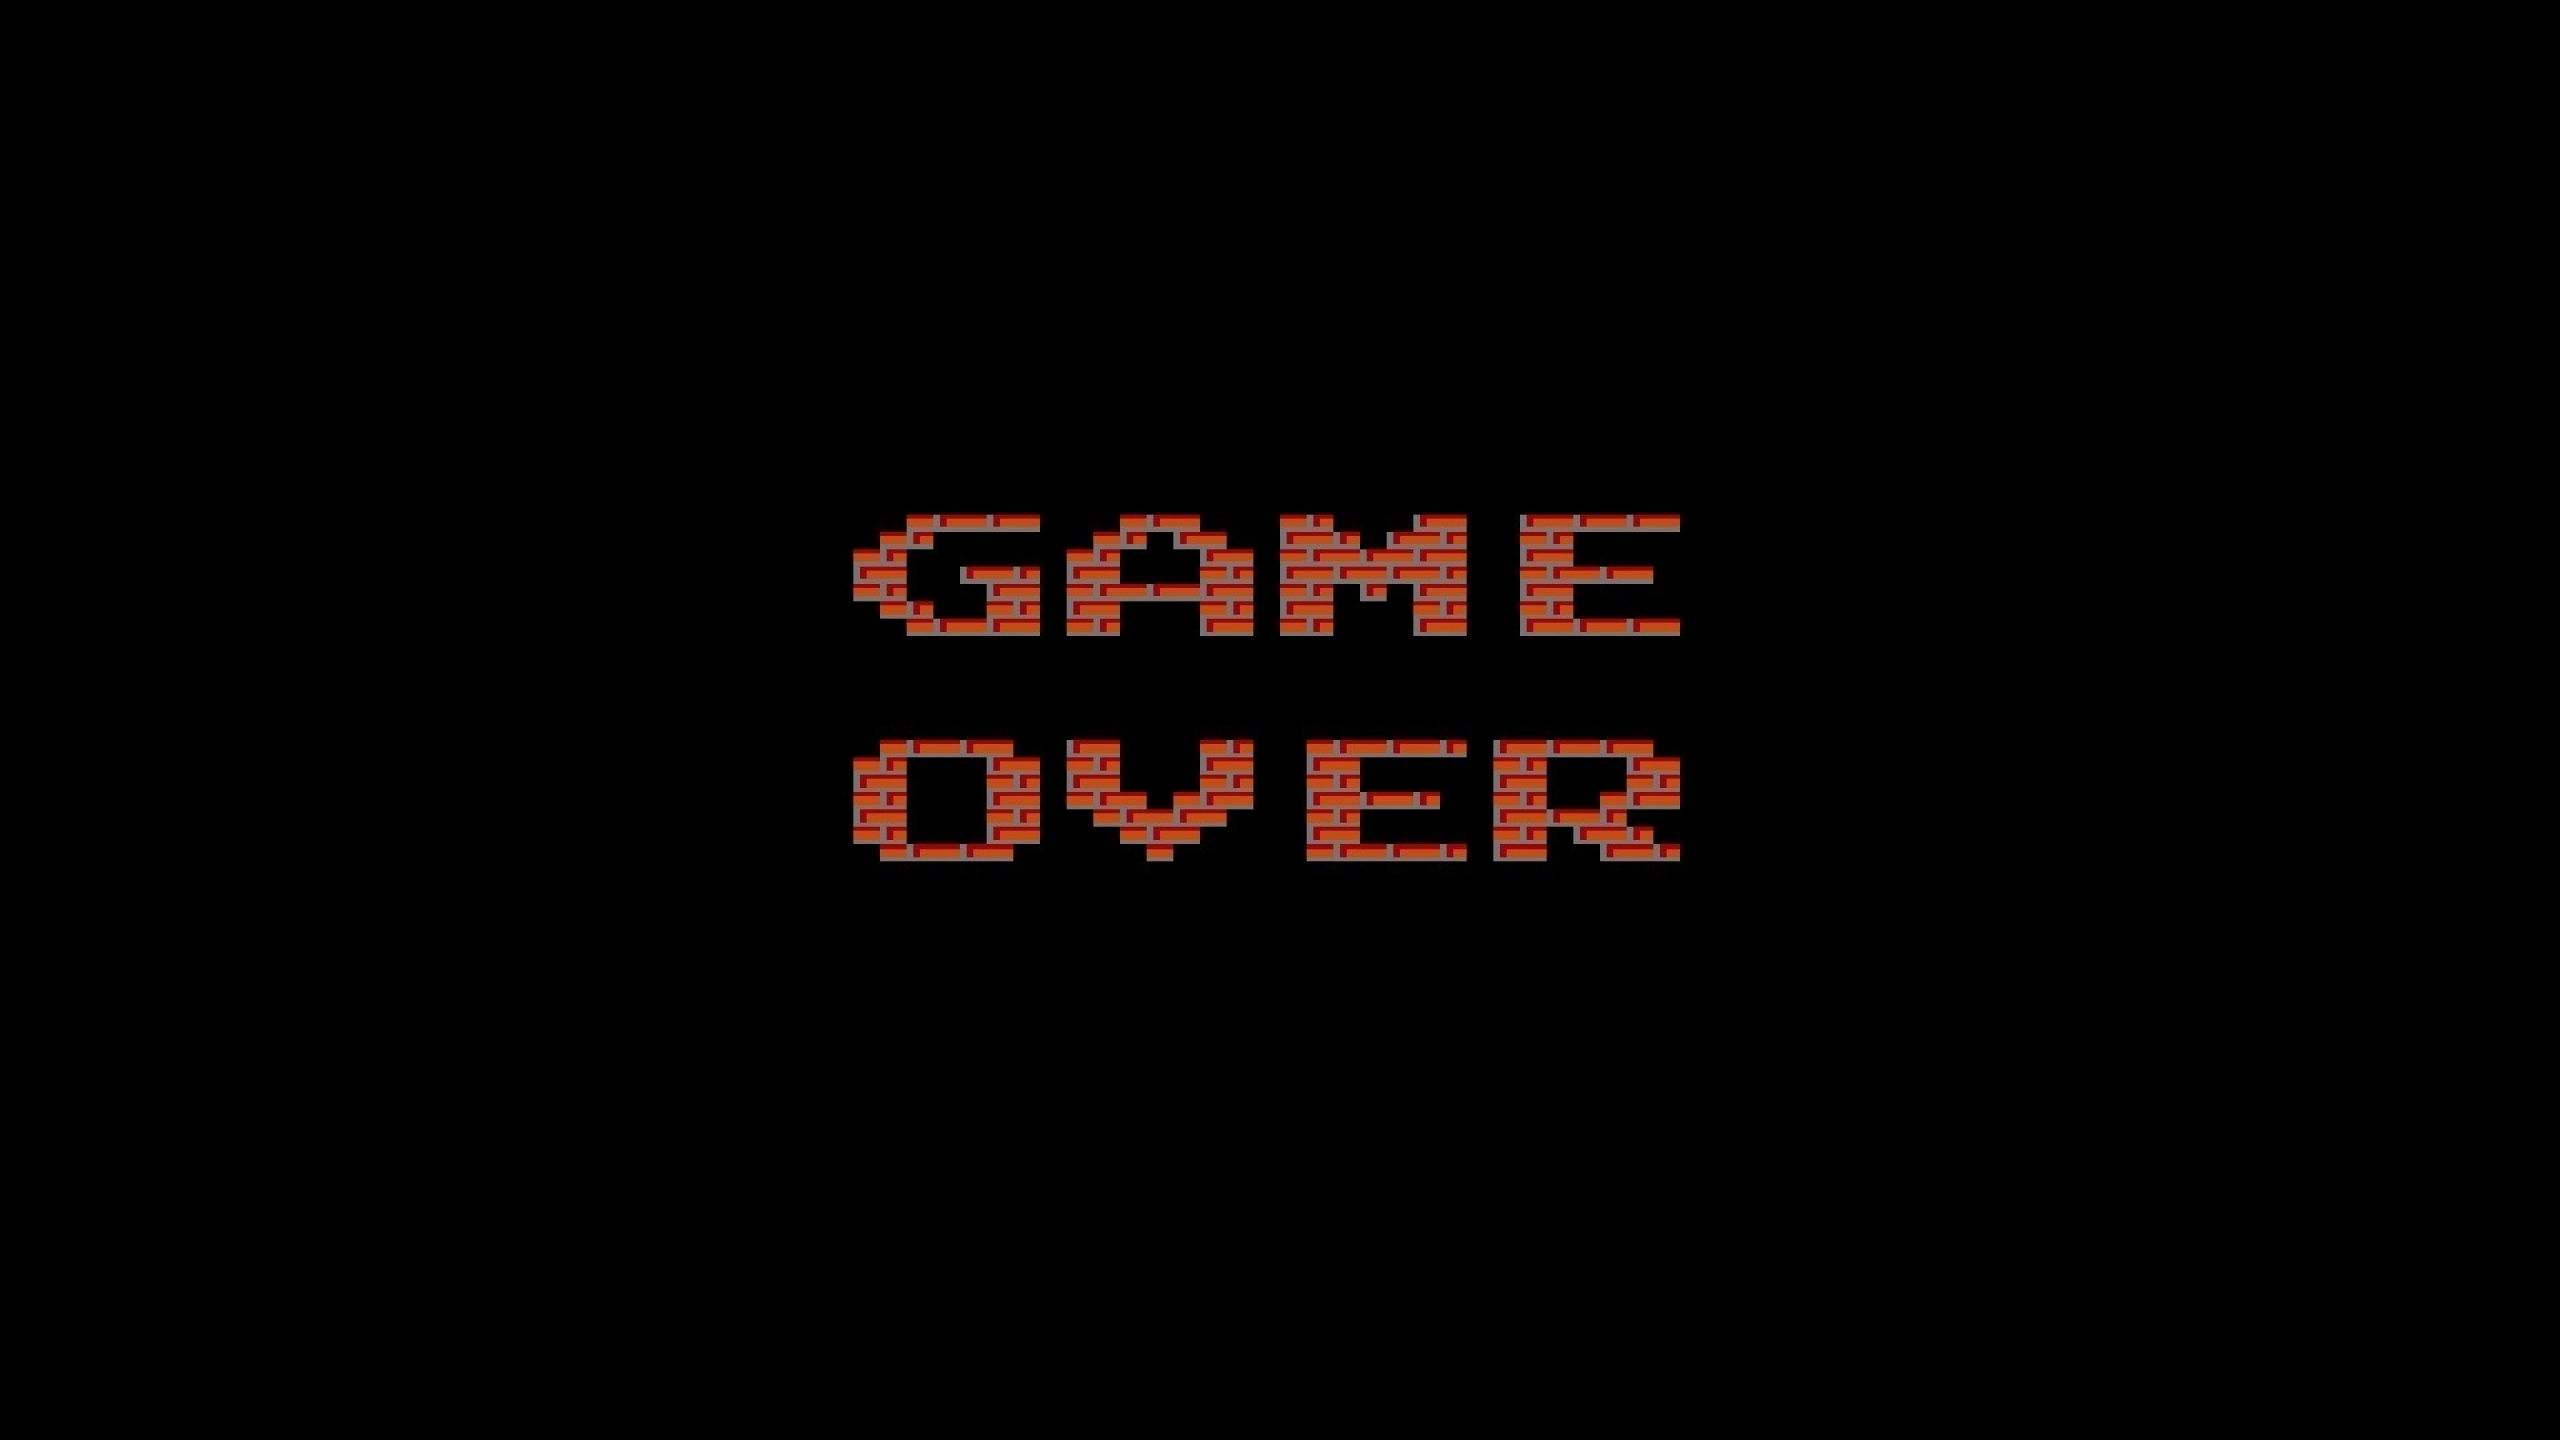 2560x1440 video games text typography game over famicom Wallpaper 2560x1440